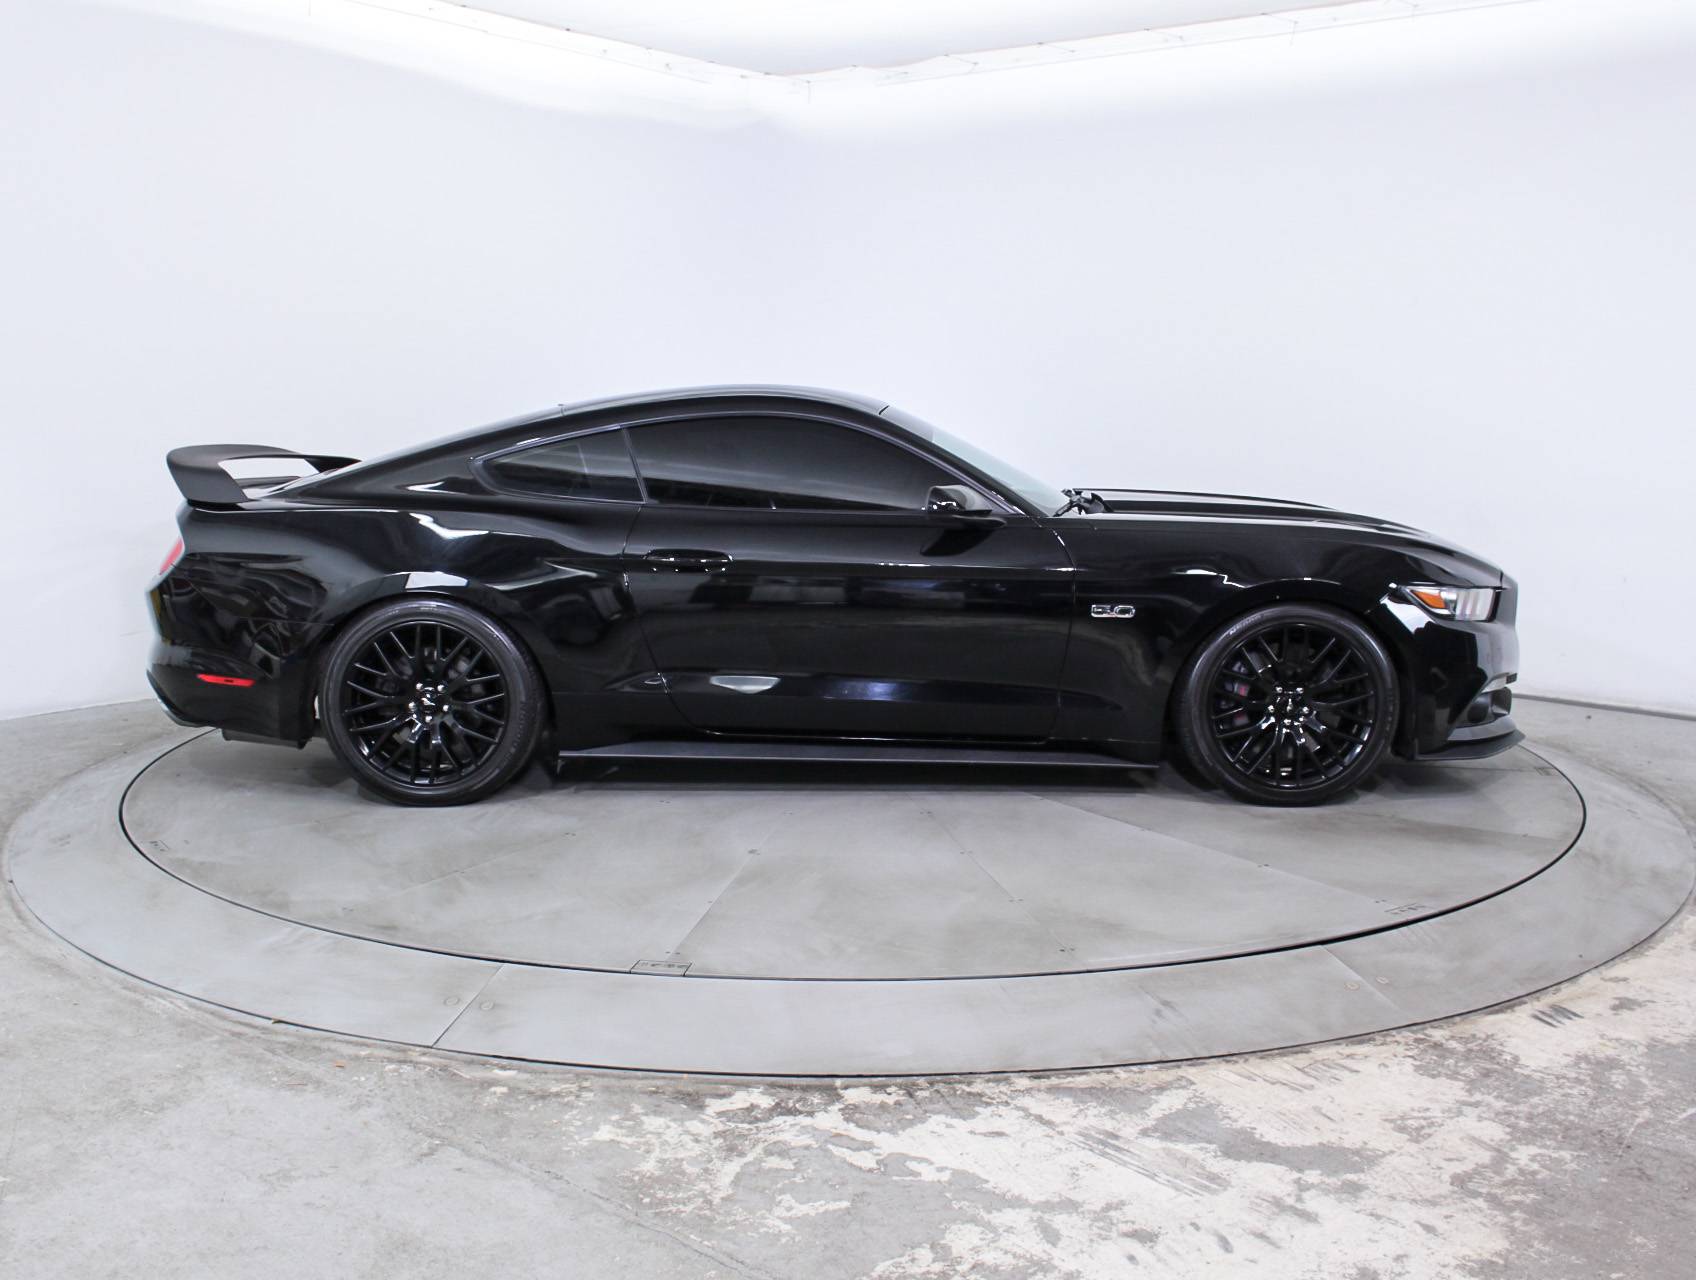 Florida Fine Cars - Used FORD MUSTANG 2015 MIAMI GT